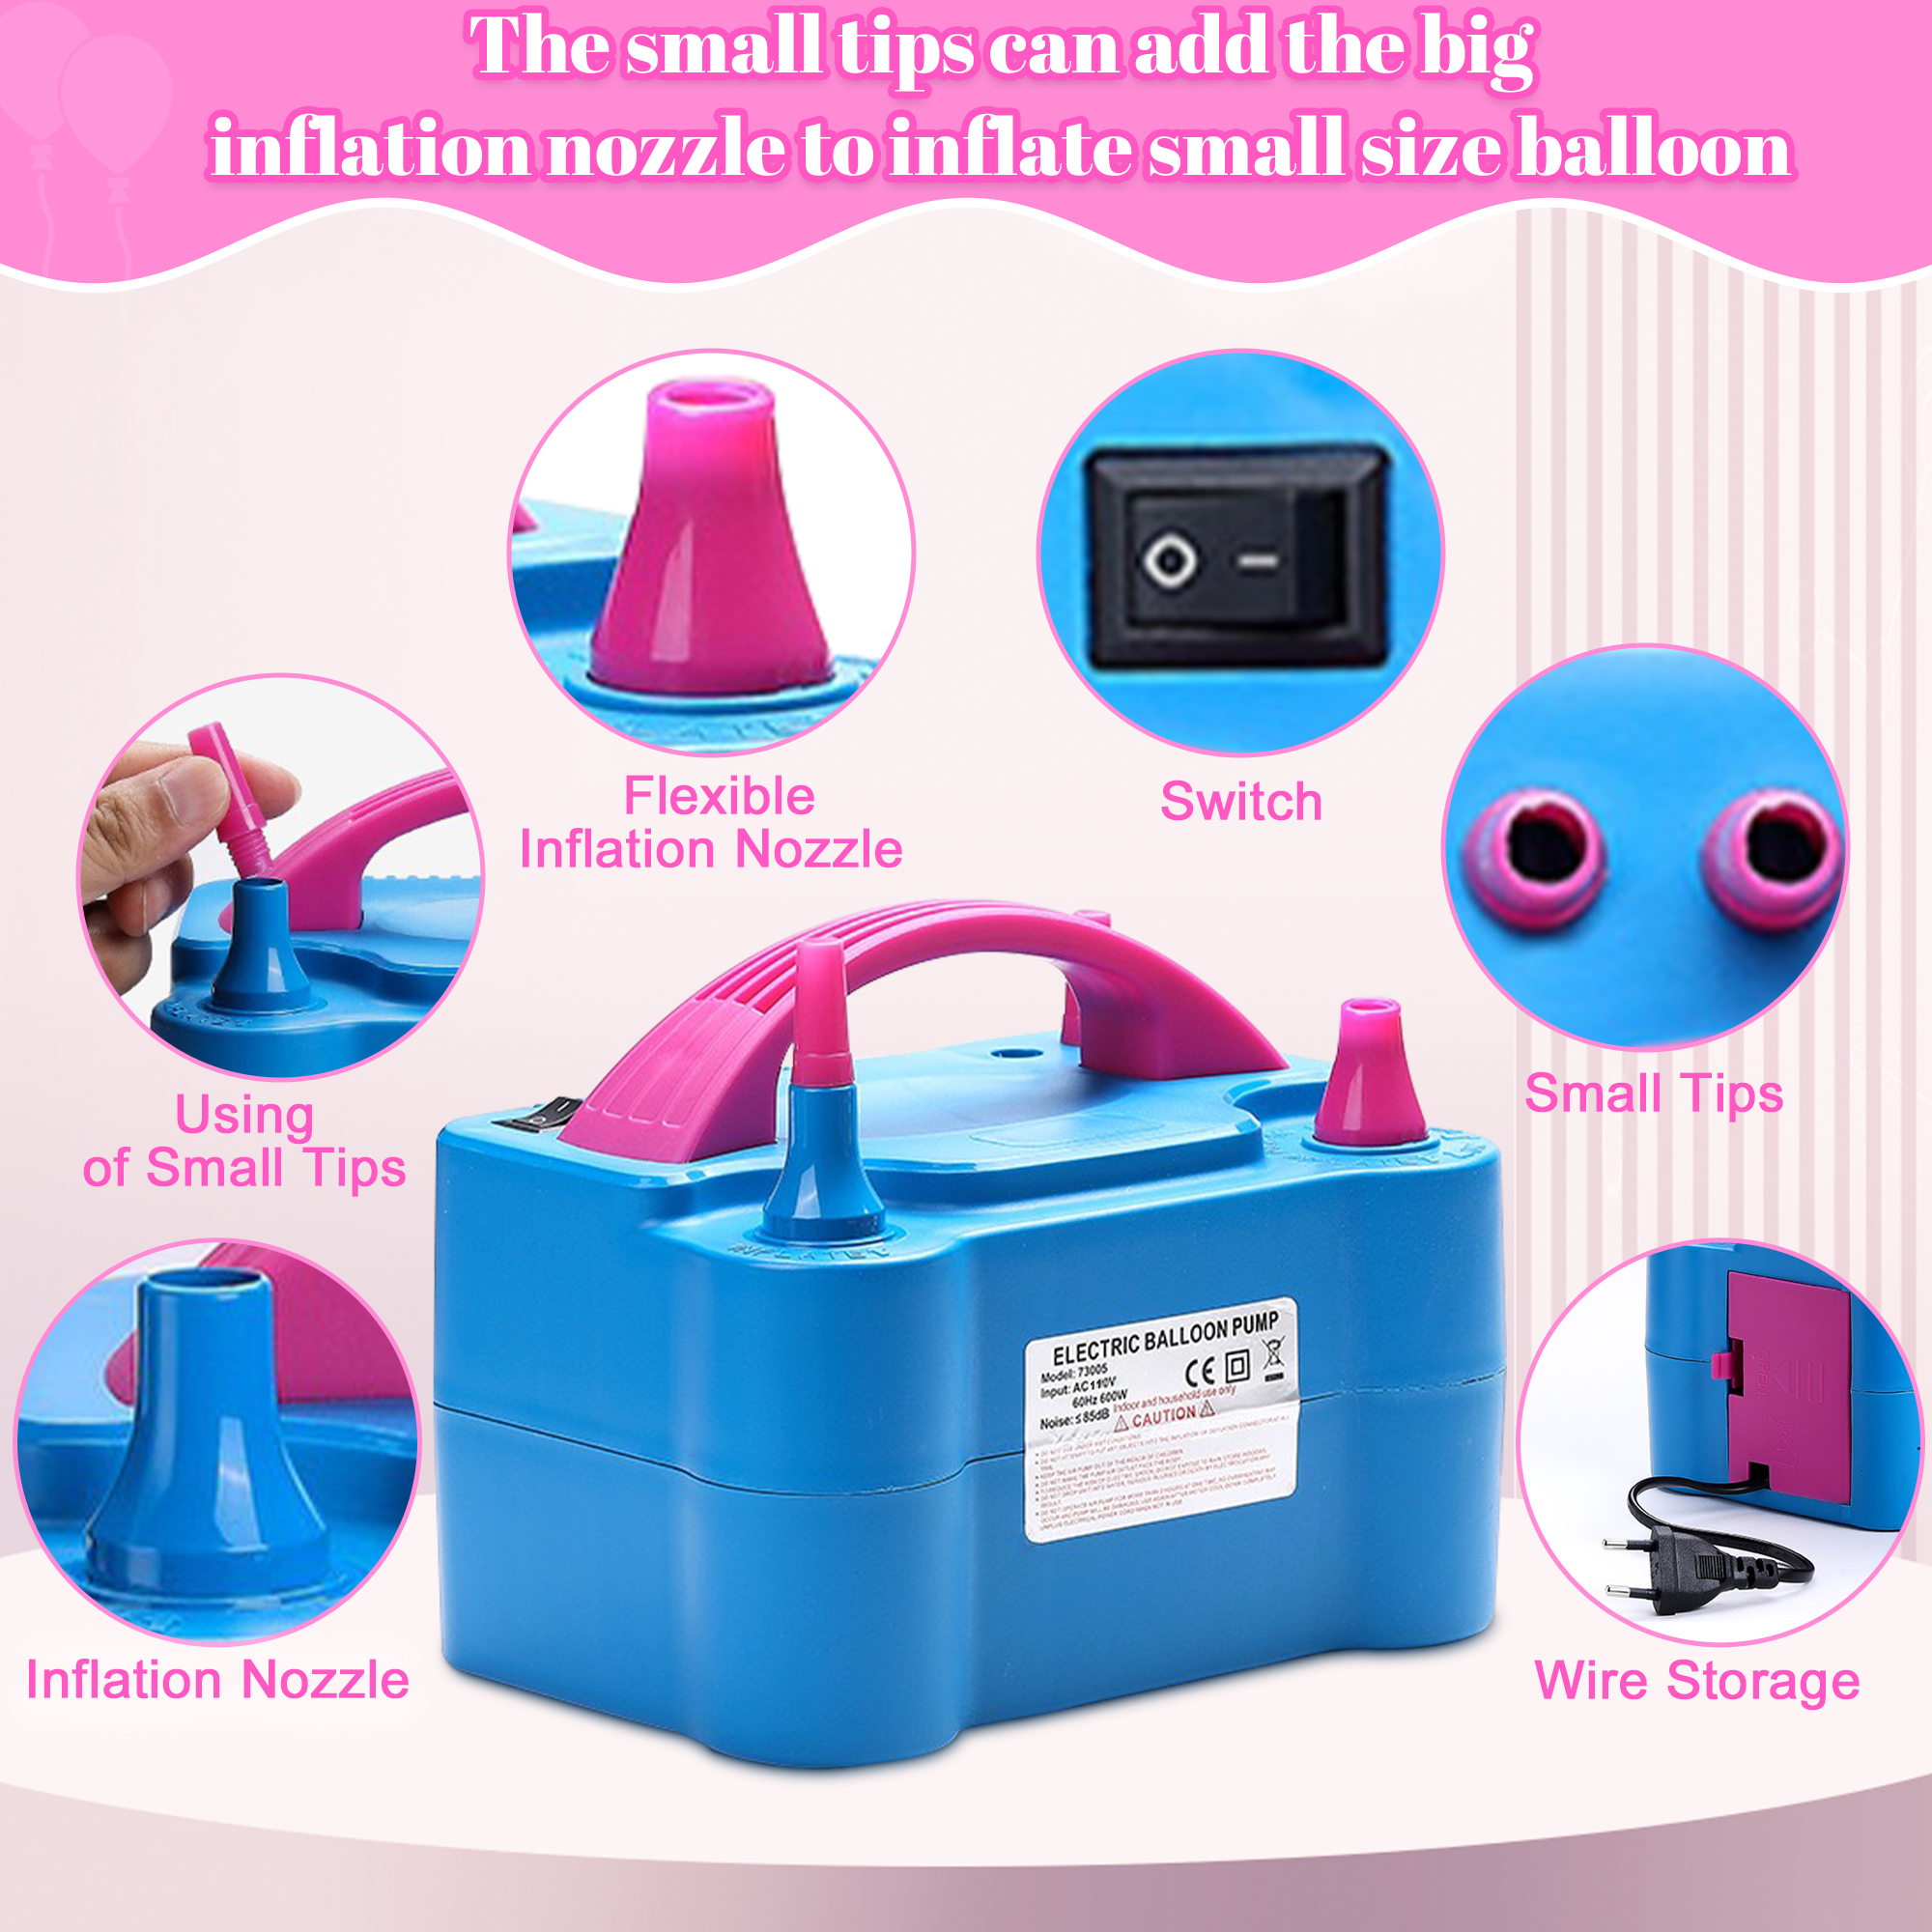 IZNEN Electric Balloon Pump, Portable Dual Nozzle Blower Air Balloon Pump & Inflator for All Balloons Party Wedding Decoration 110V, 600W, Blue - image 5 of 7